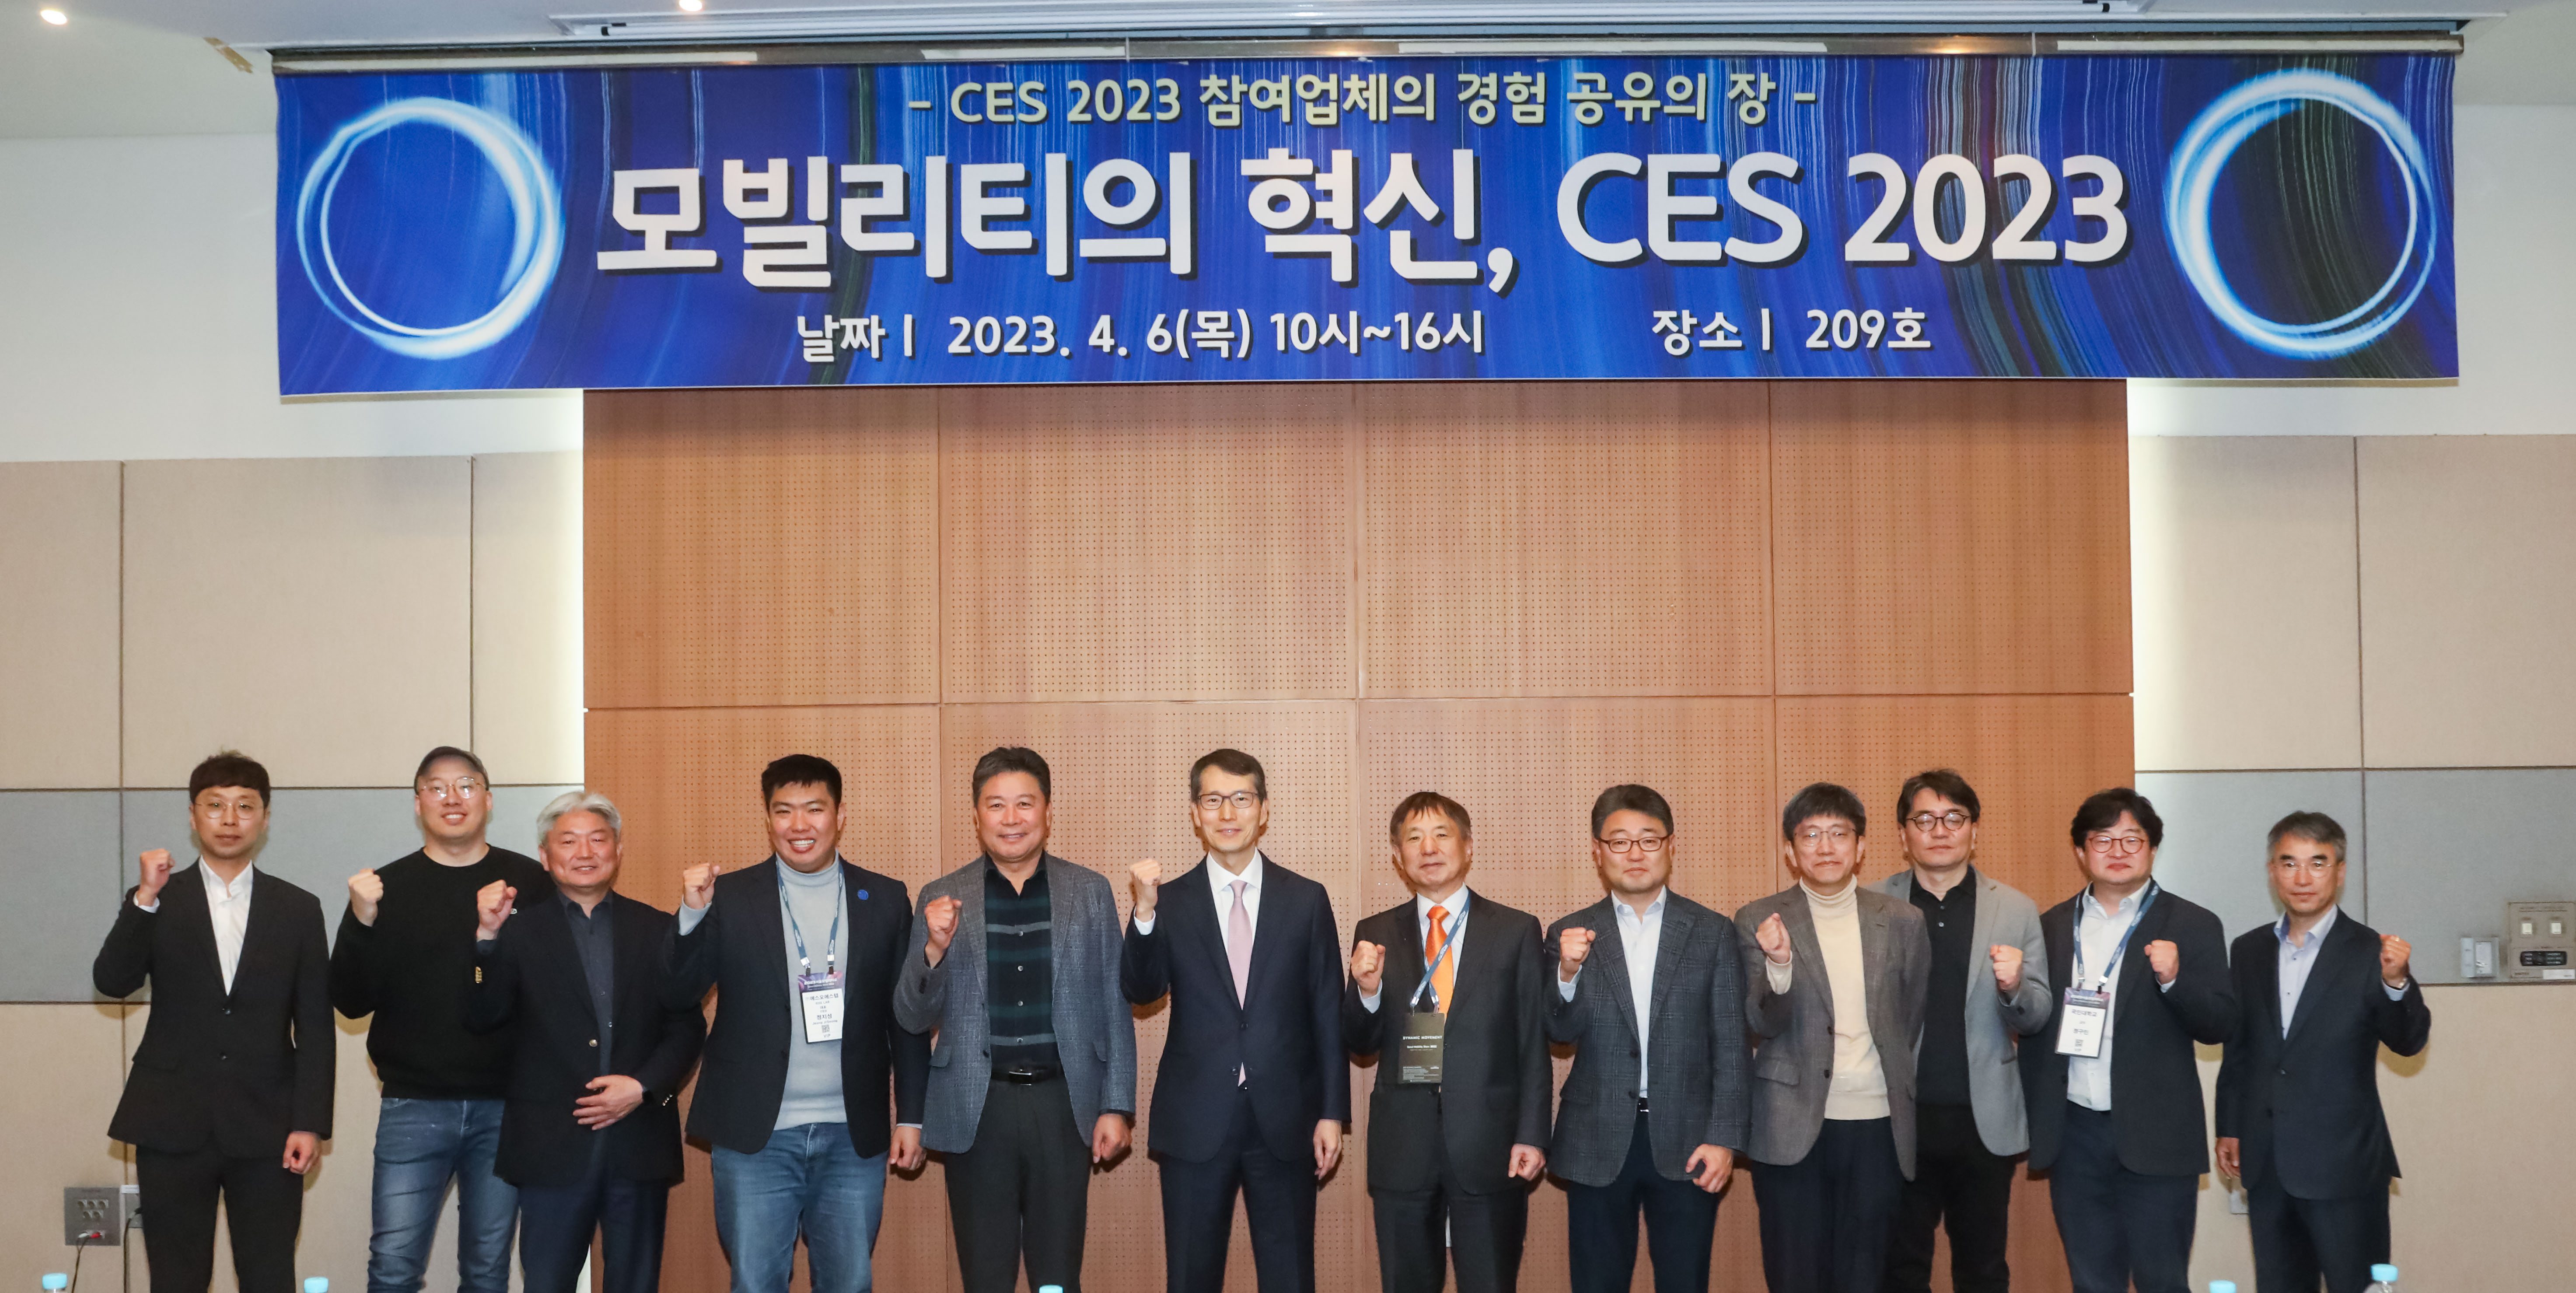 #Forum. 4/6 모빌리티의 혁신, CES 2023 (Innovation in Mobility, CES 2023) ｜SMS2023